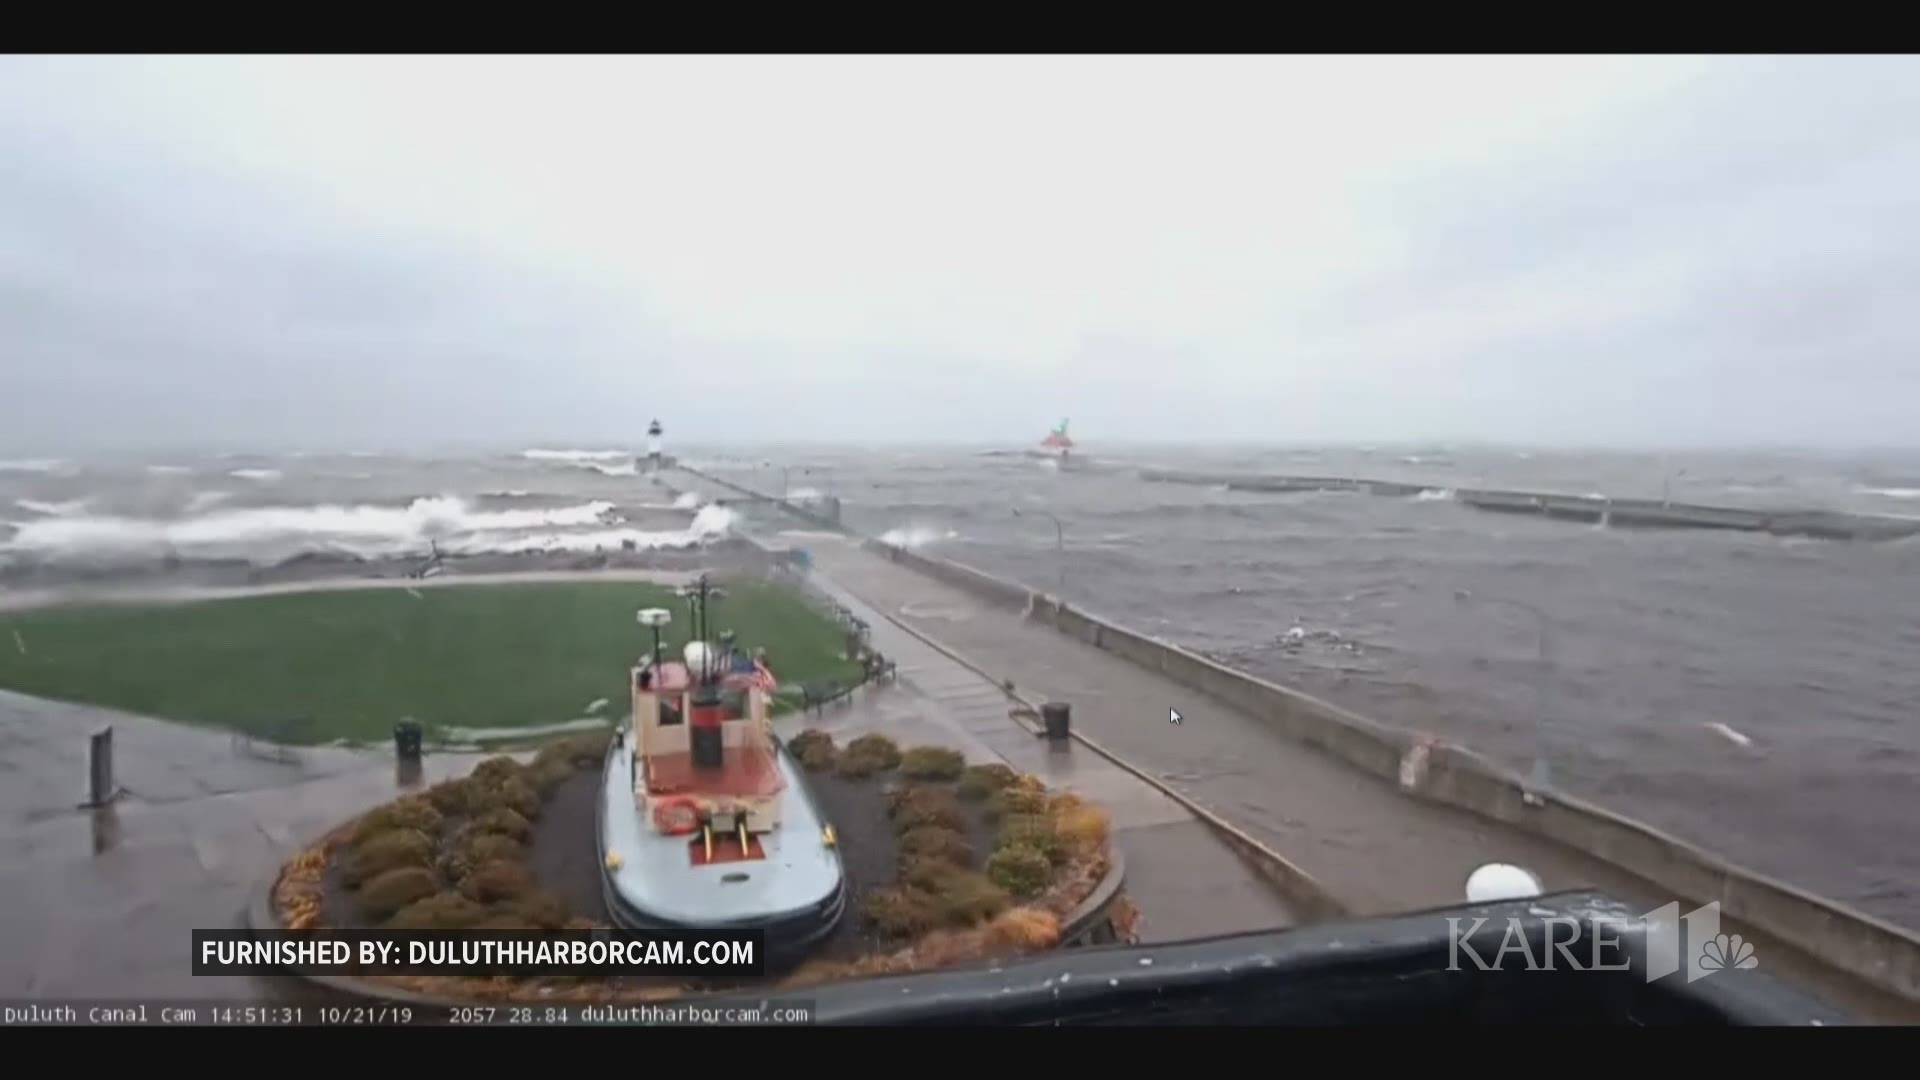 More than an inch of rain and 45 mph wind gusts were forecast in Duluth.